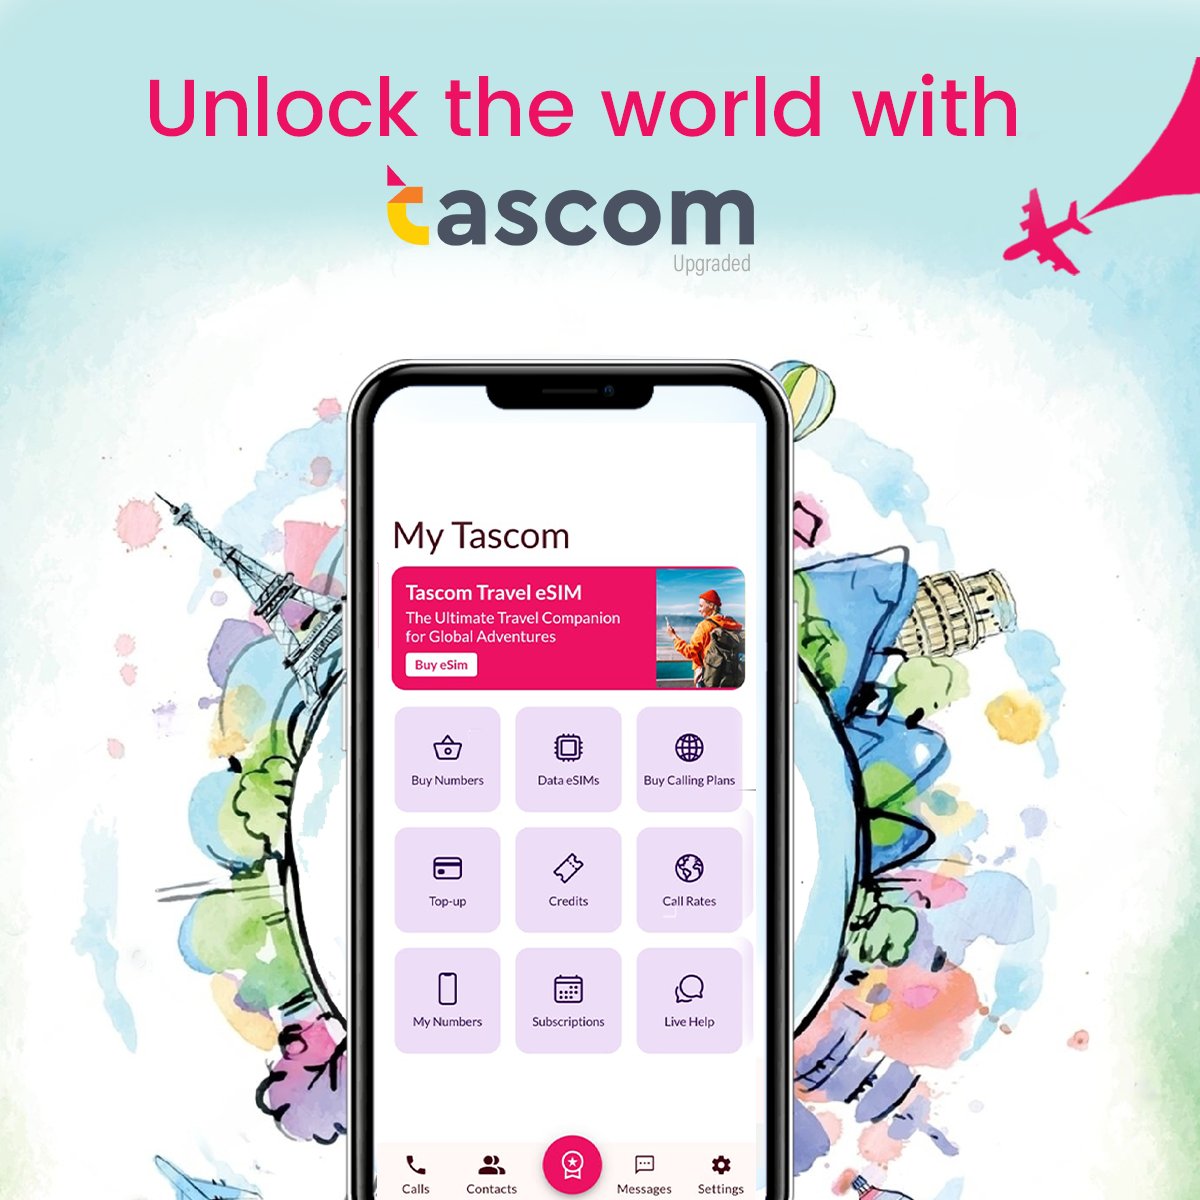 Thrilled to announce the launch of Tascom, the ultimate app for Global Connectivity. Tascom offers Travel eSIM, Virtual Phone Numbers, International Calling & Local calling bundles. #Tascom #TravelApp #VirtualNumber #InternationalCalling #LocalCalling #ESIM #SecondPhoneNumber